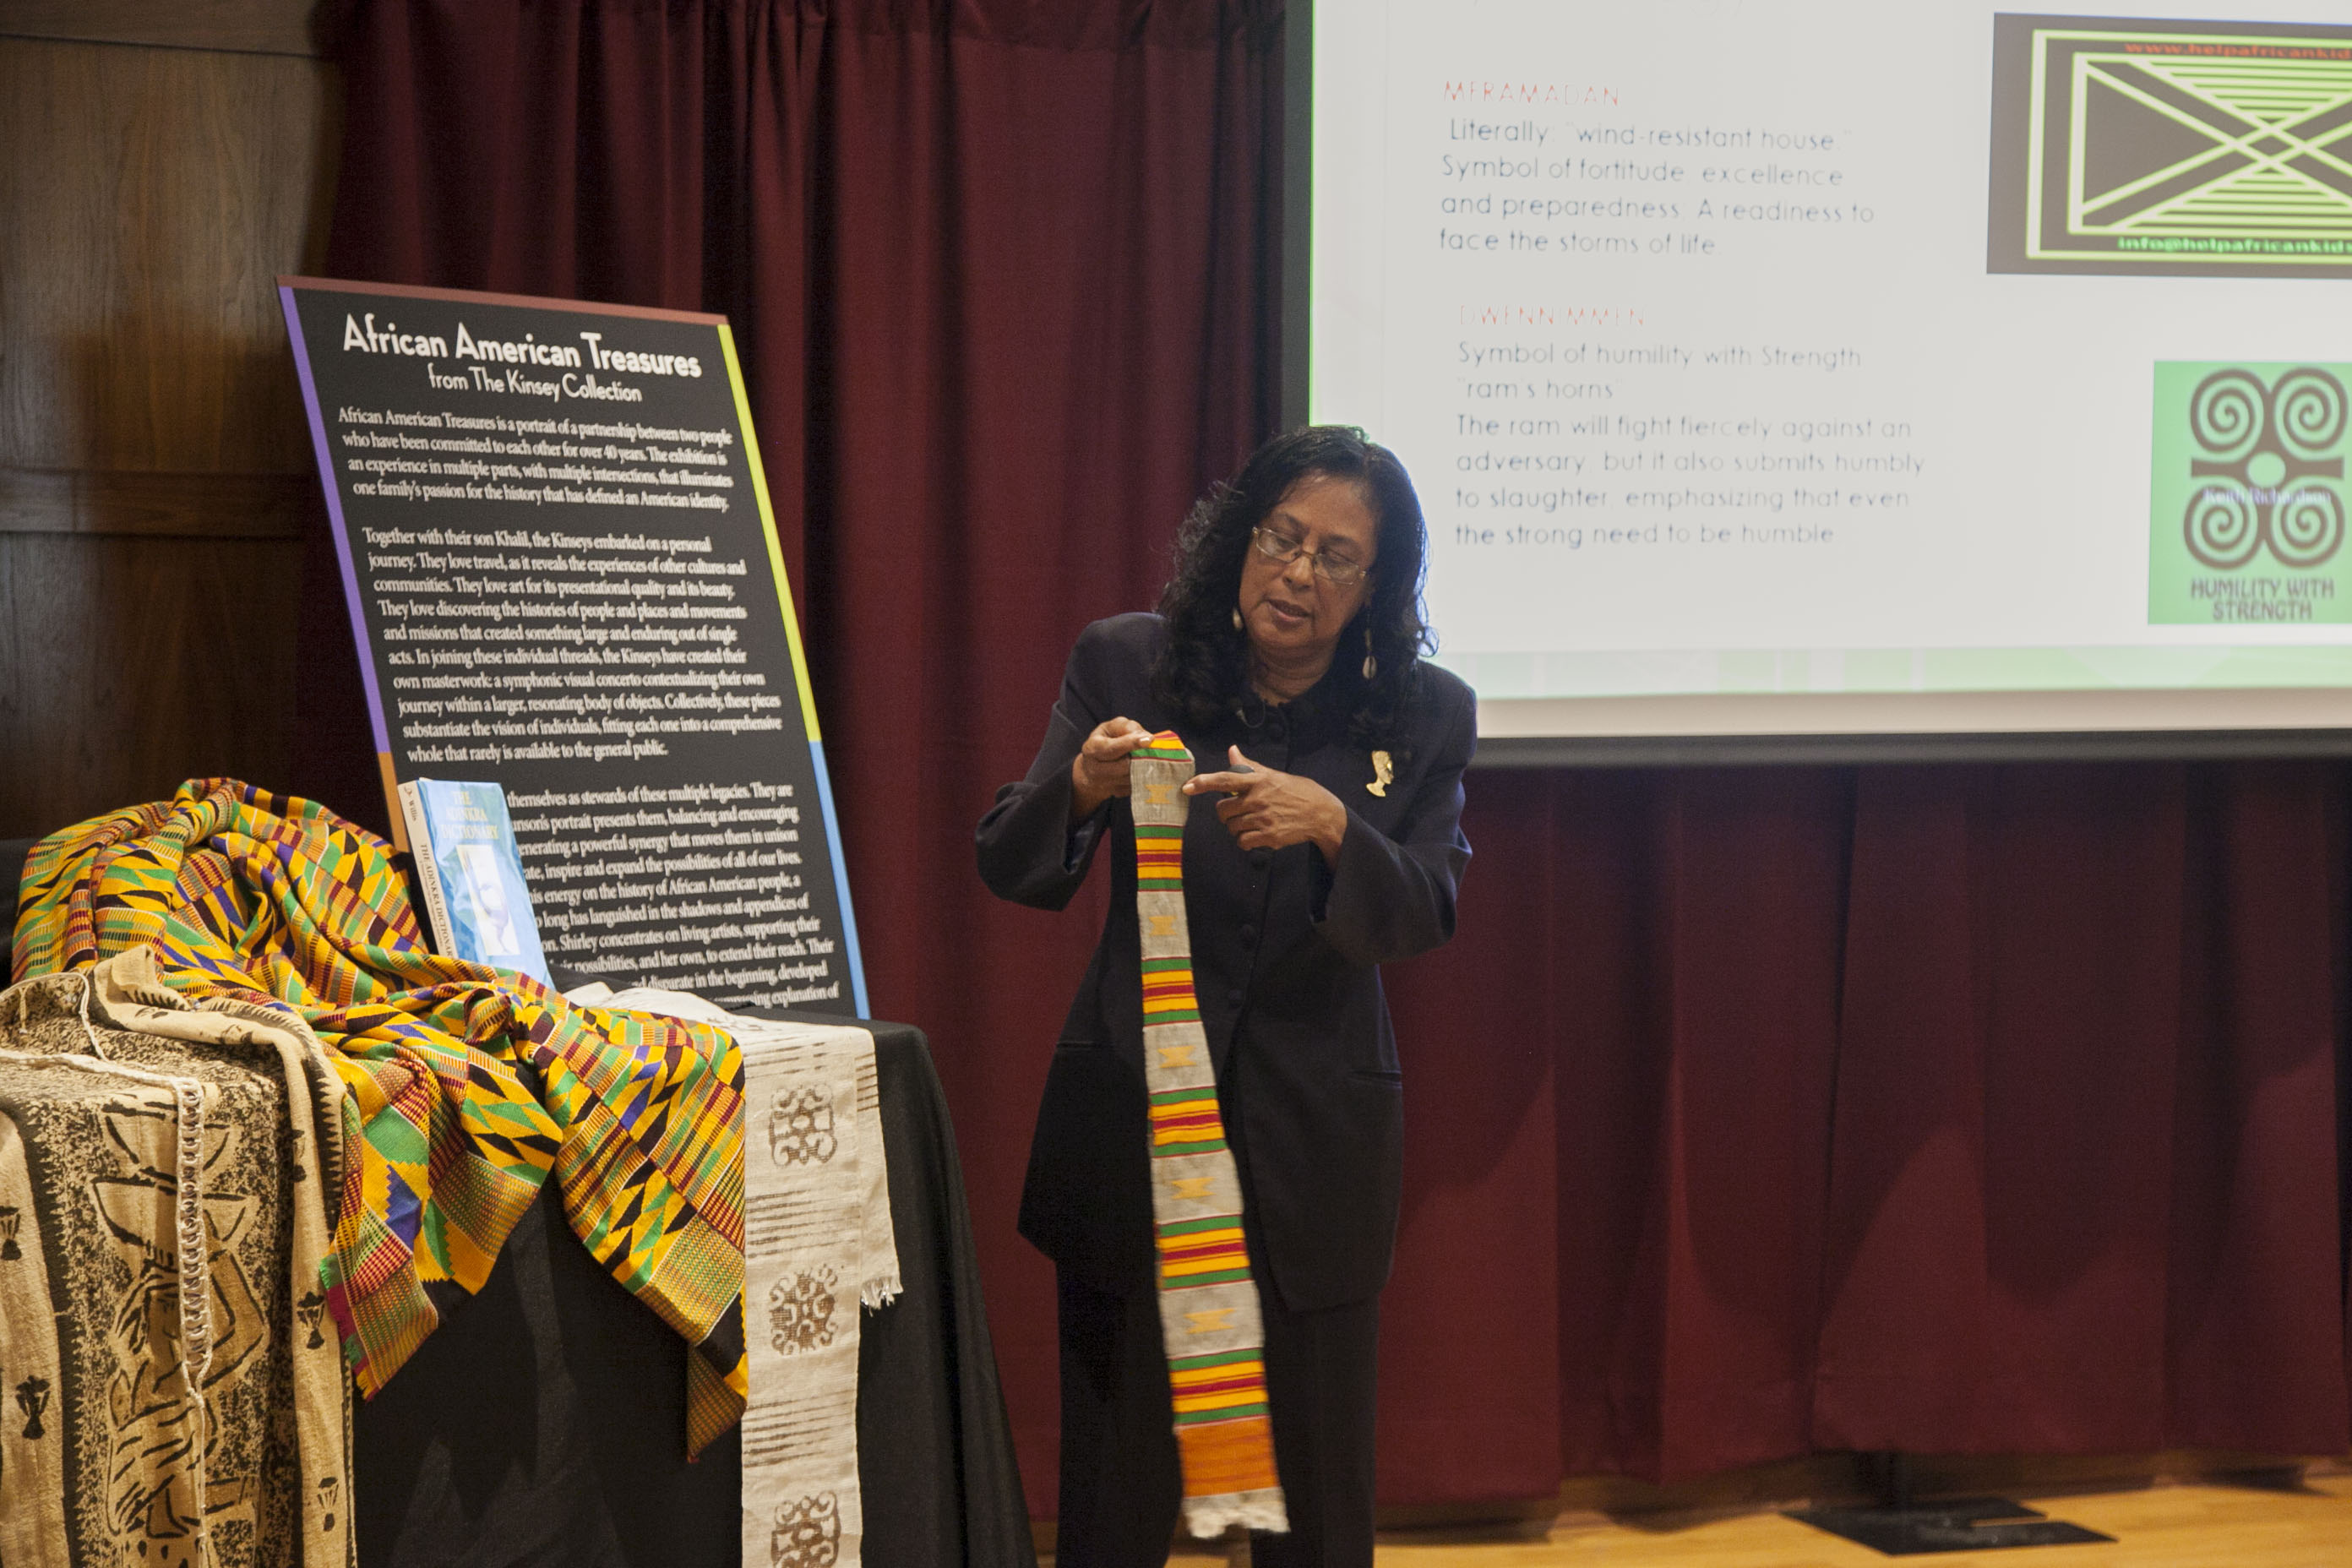 Shirley Hanshaw, MSU associate professor of English and African American Studies faculty member, led the Thursday [April 23] lecture that was part of the The Kinsey Collection lecture series at Mitchell Memorial Library.